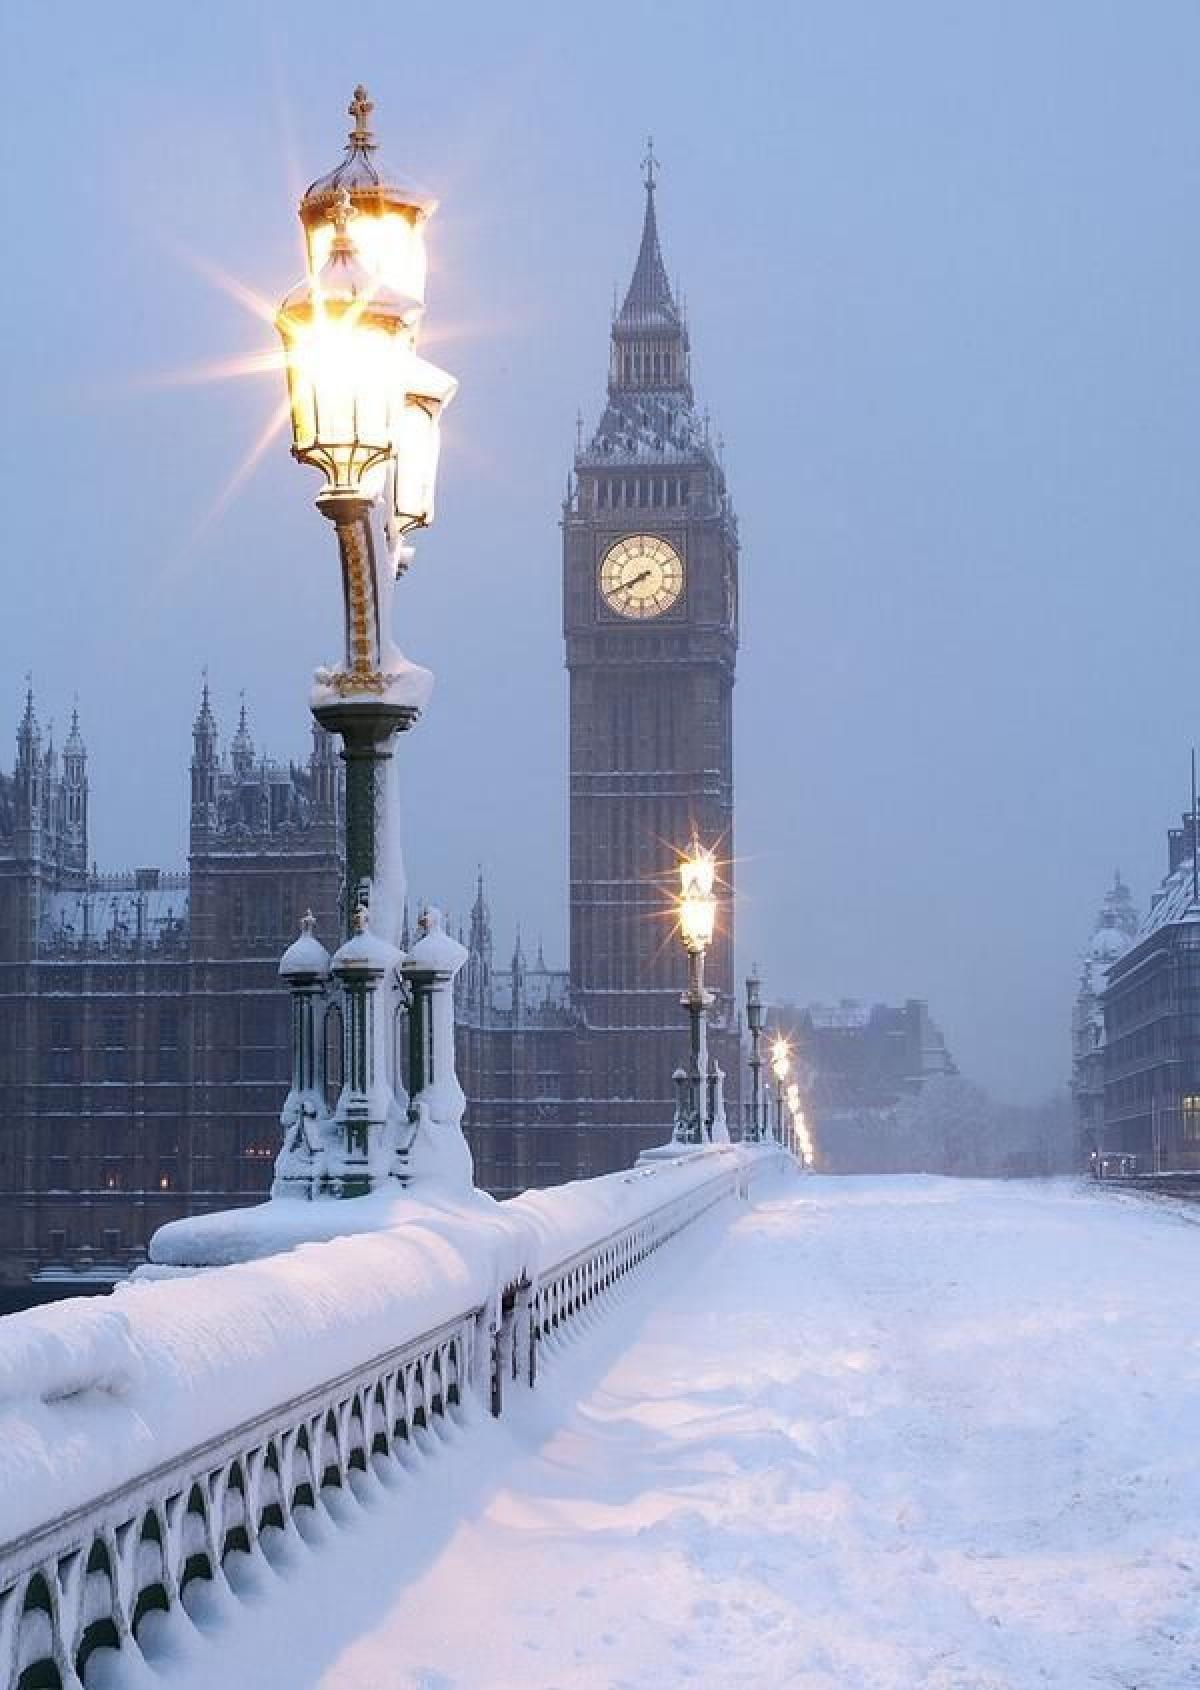 London Christmas Iphone Wallpapers Top Free London Christmas Iphone Backgrounds Wallpaperaccess